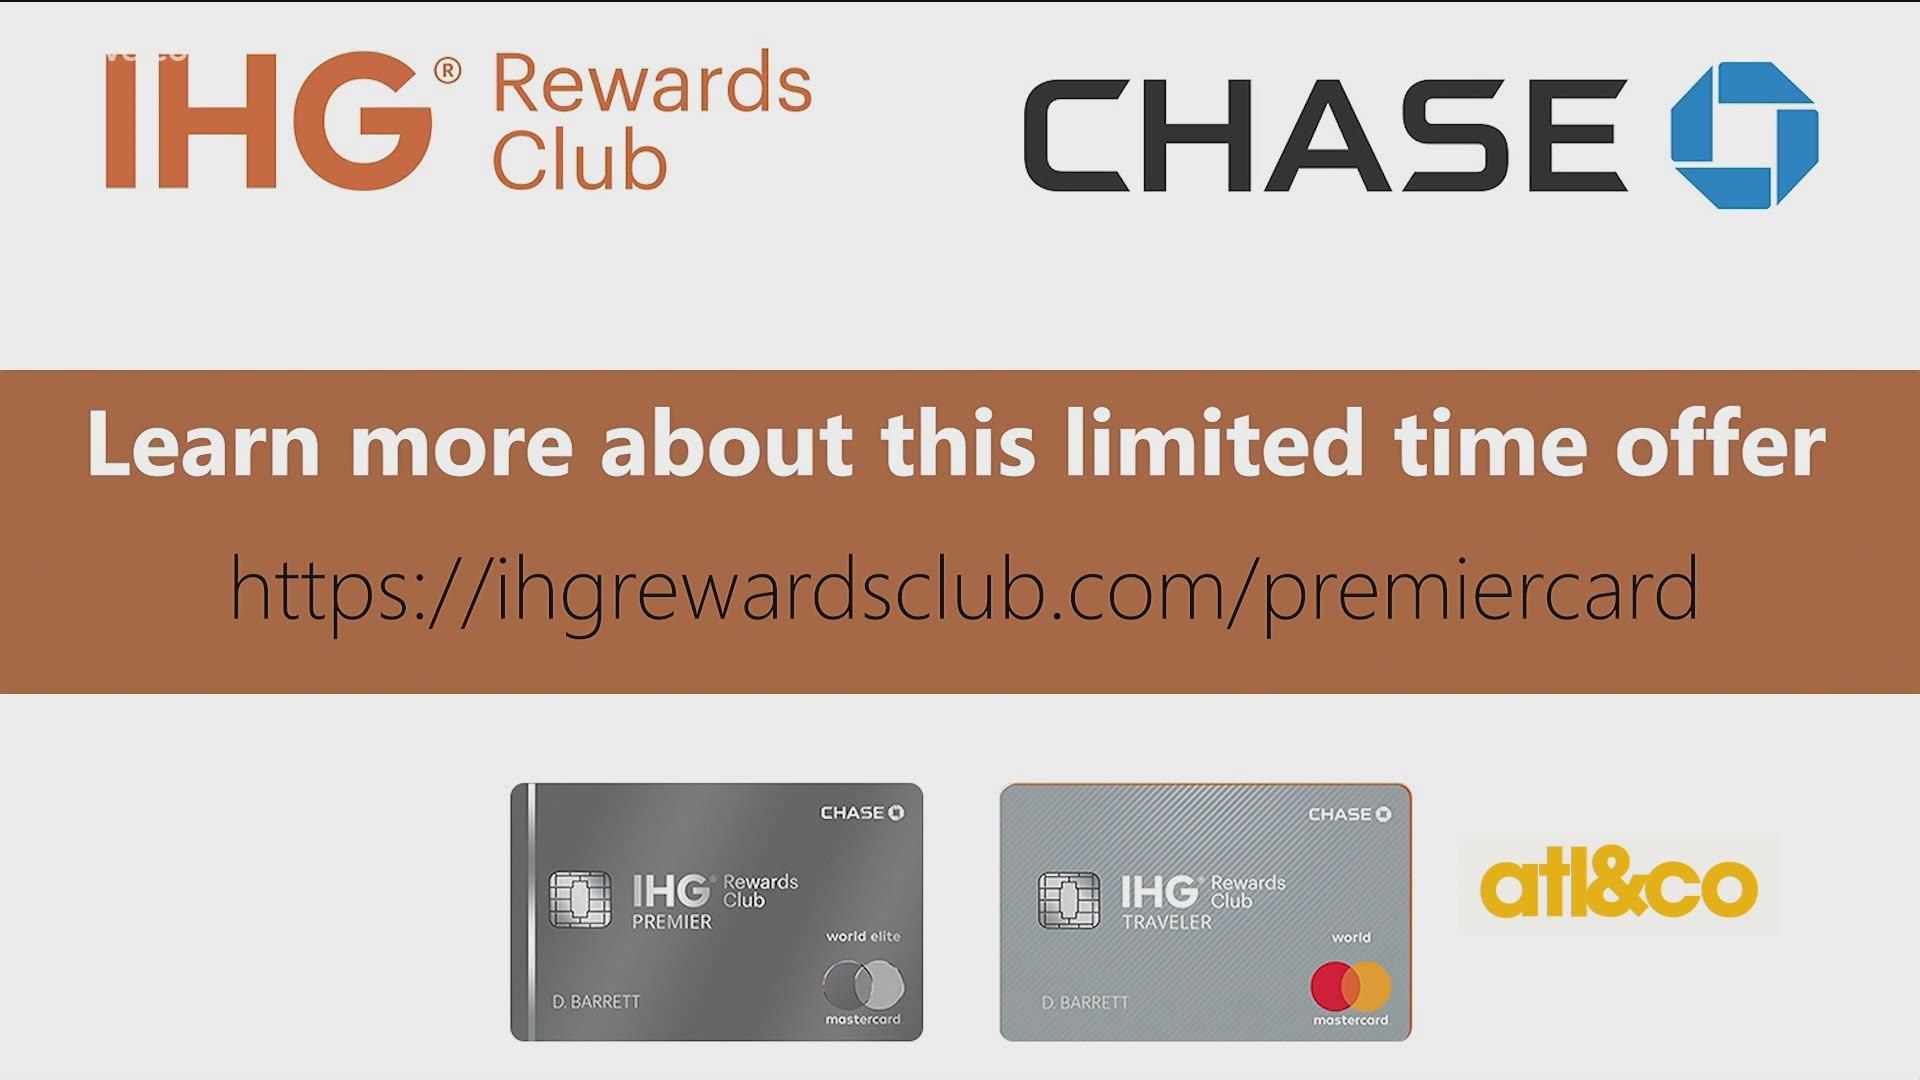 Sign up for IHG Rewards Club, earn bonus points for future trips, and get to traveling again!